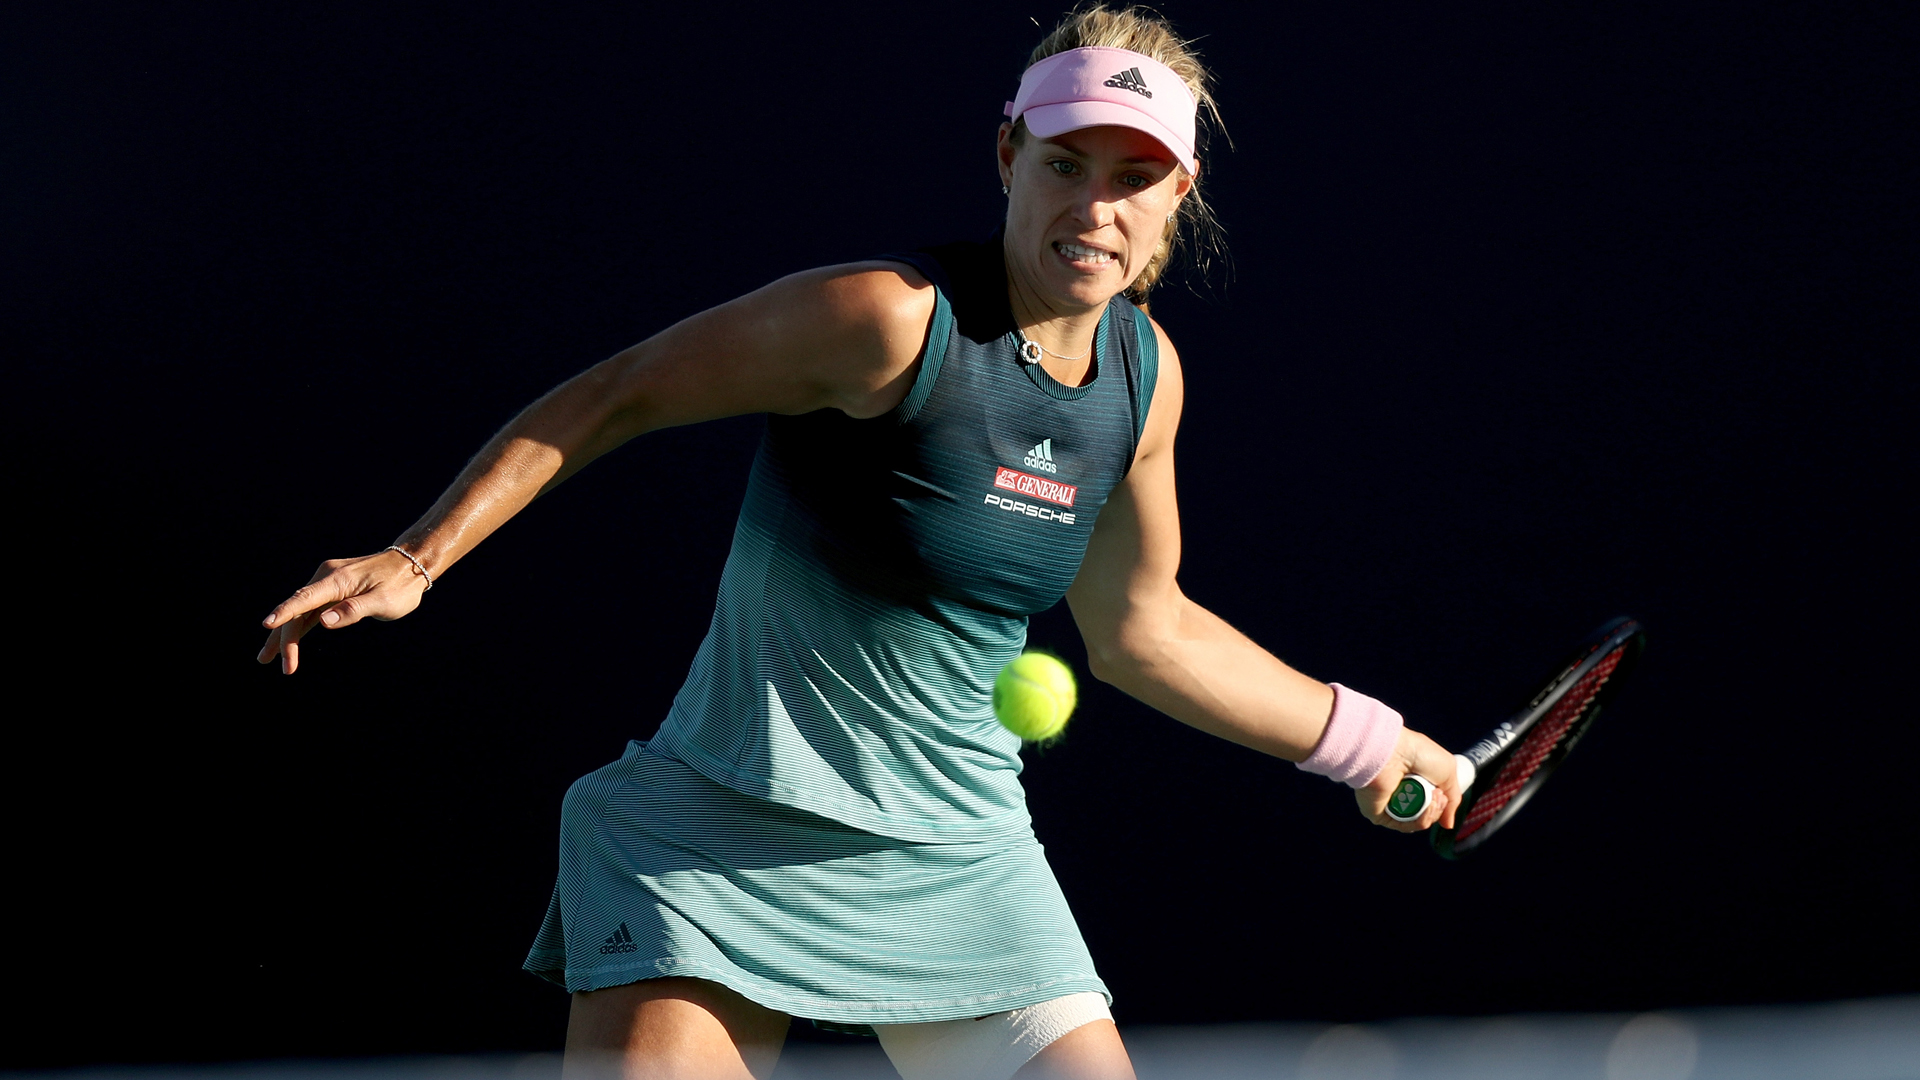 Former Wimbledon champions Angelique Kerber and Maria Sharapova will do battle at the Mallorca Open this week.